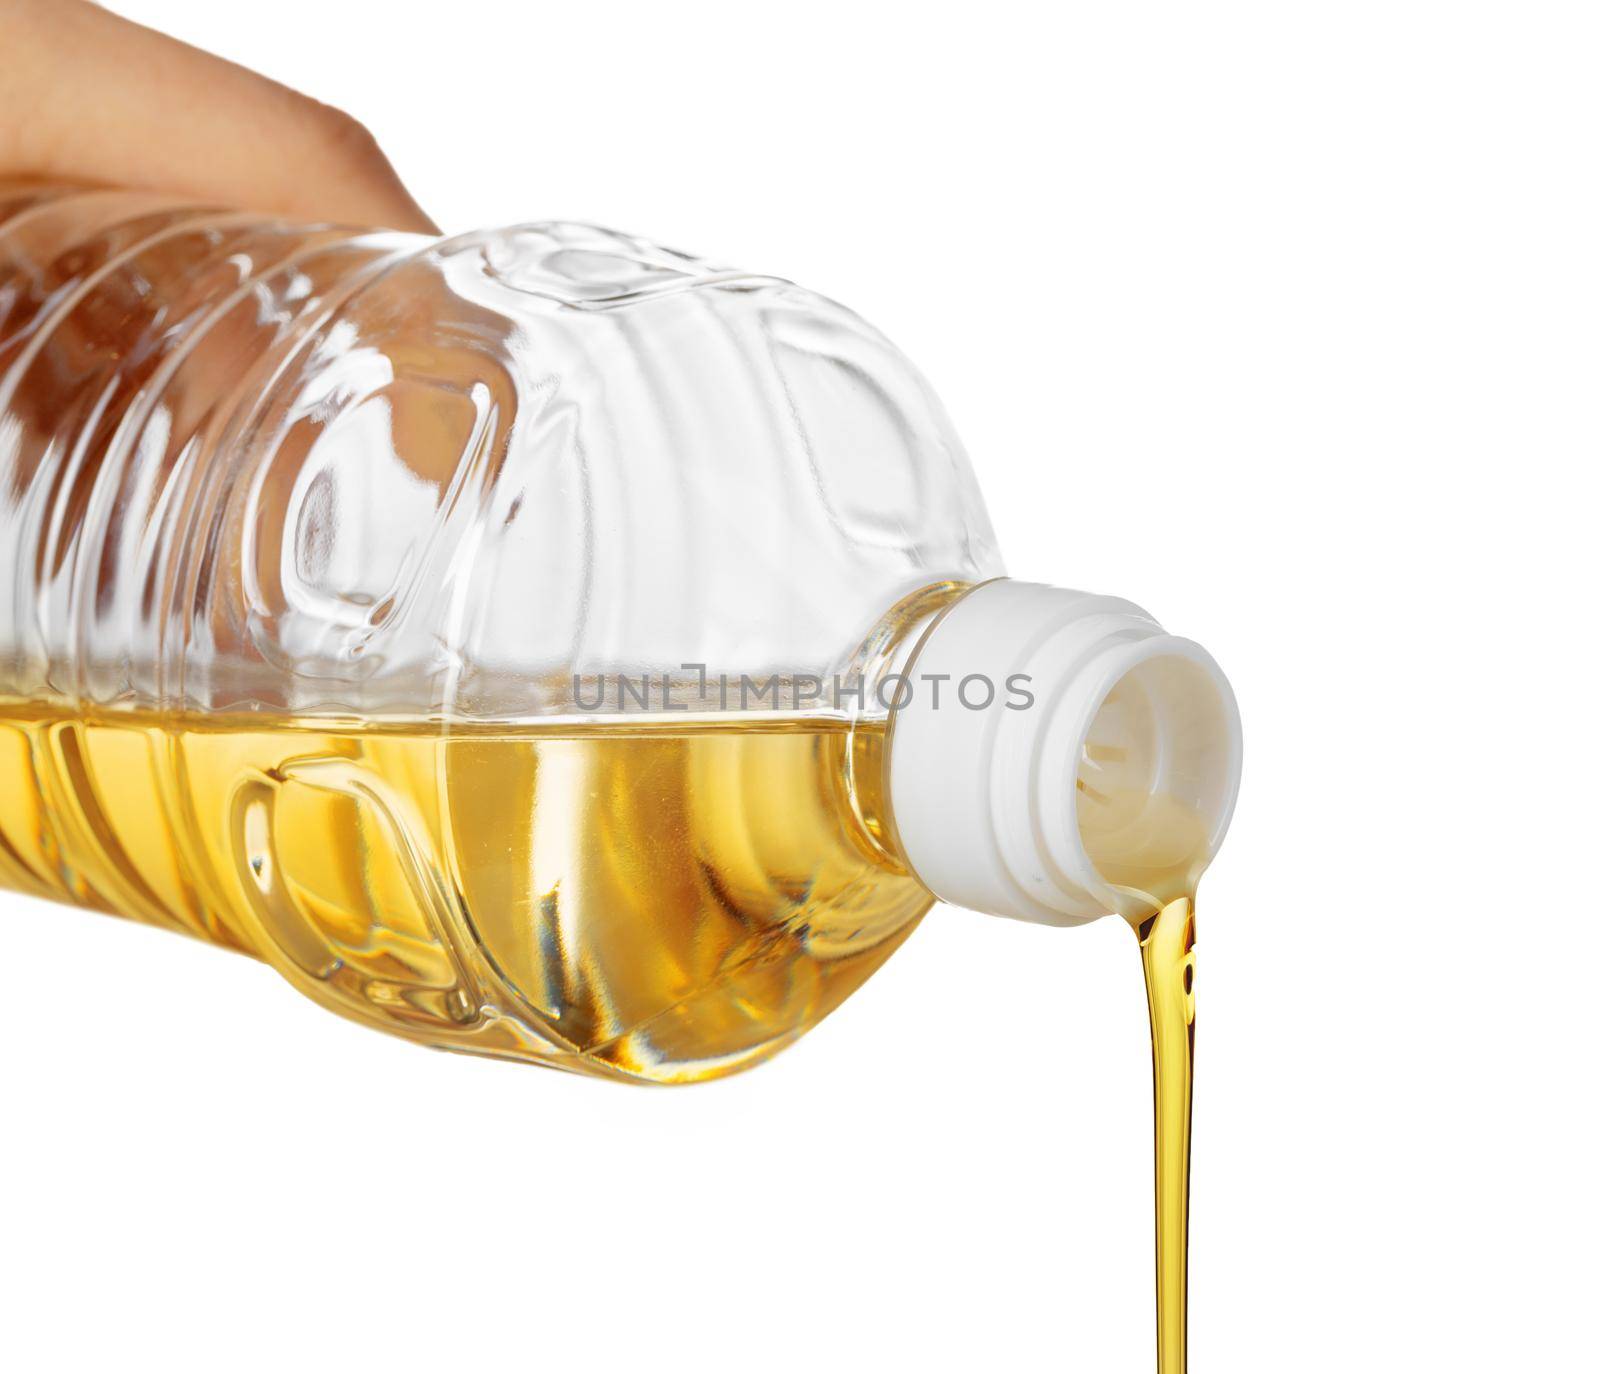 Hand of woman pouring cooking oil from plastic bottle. Isolated on white background. by Fabrikasimf